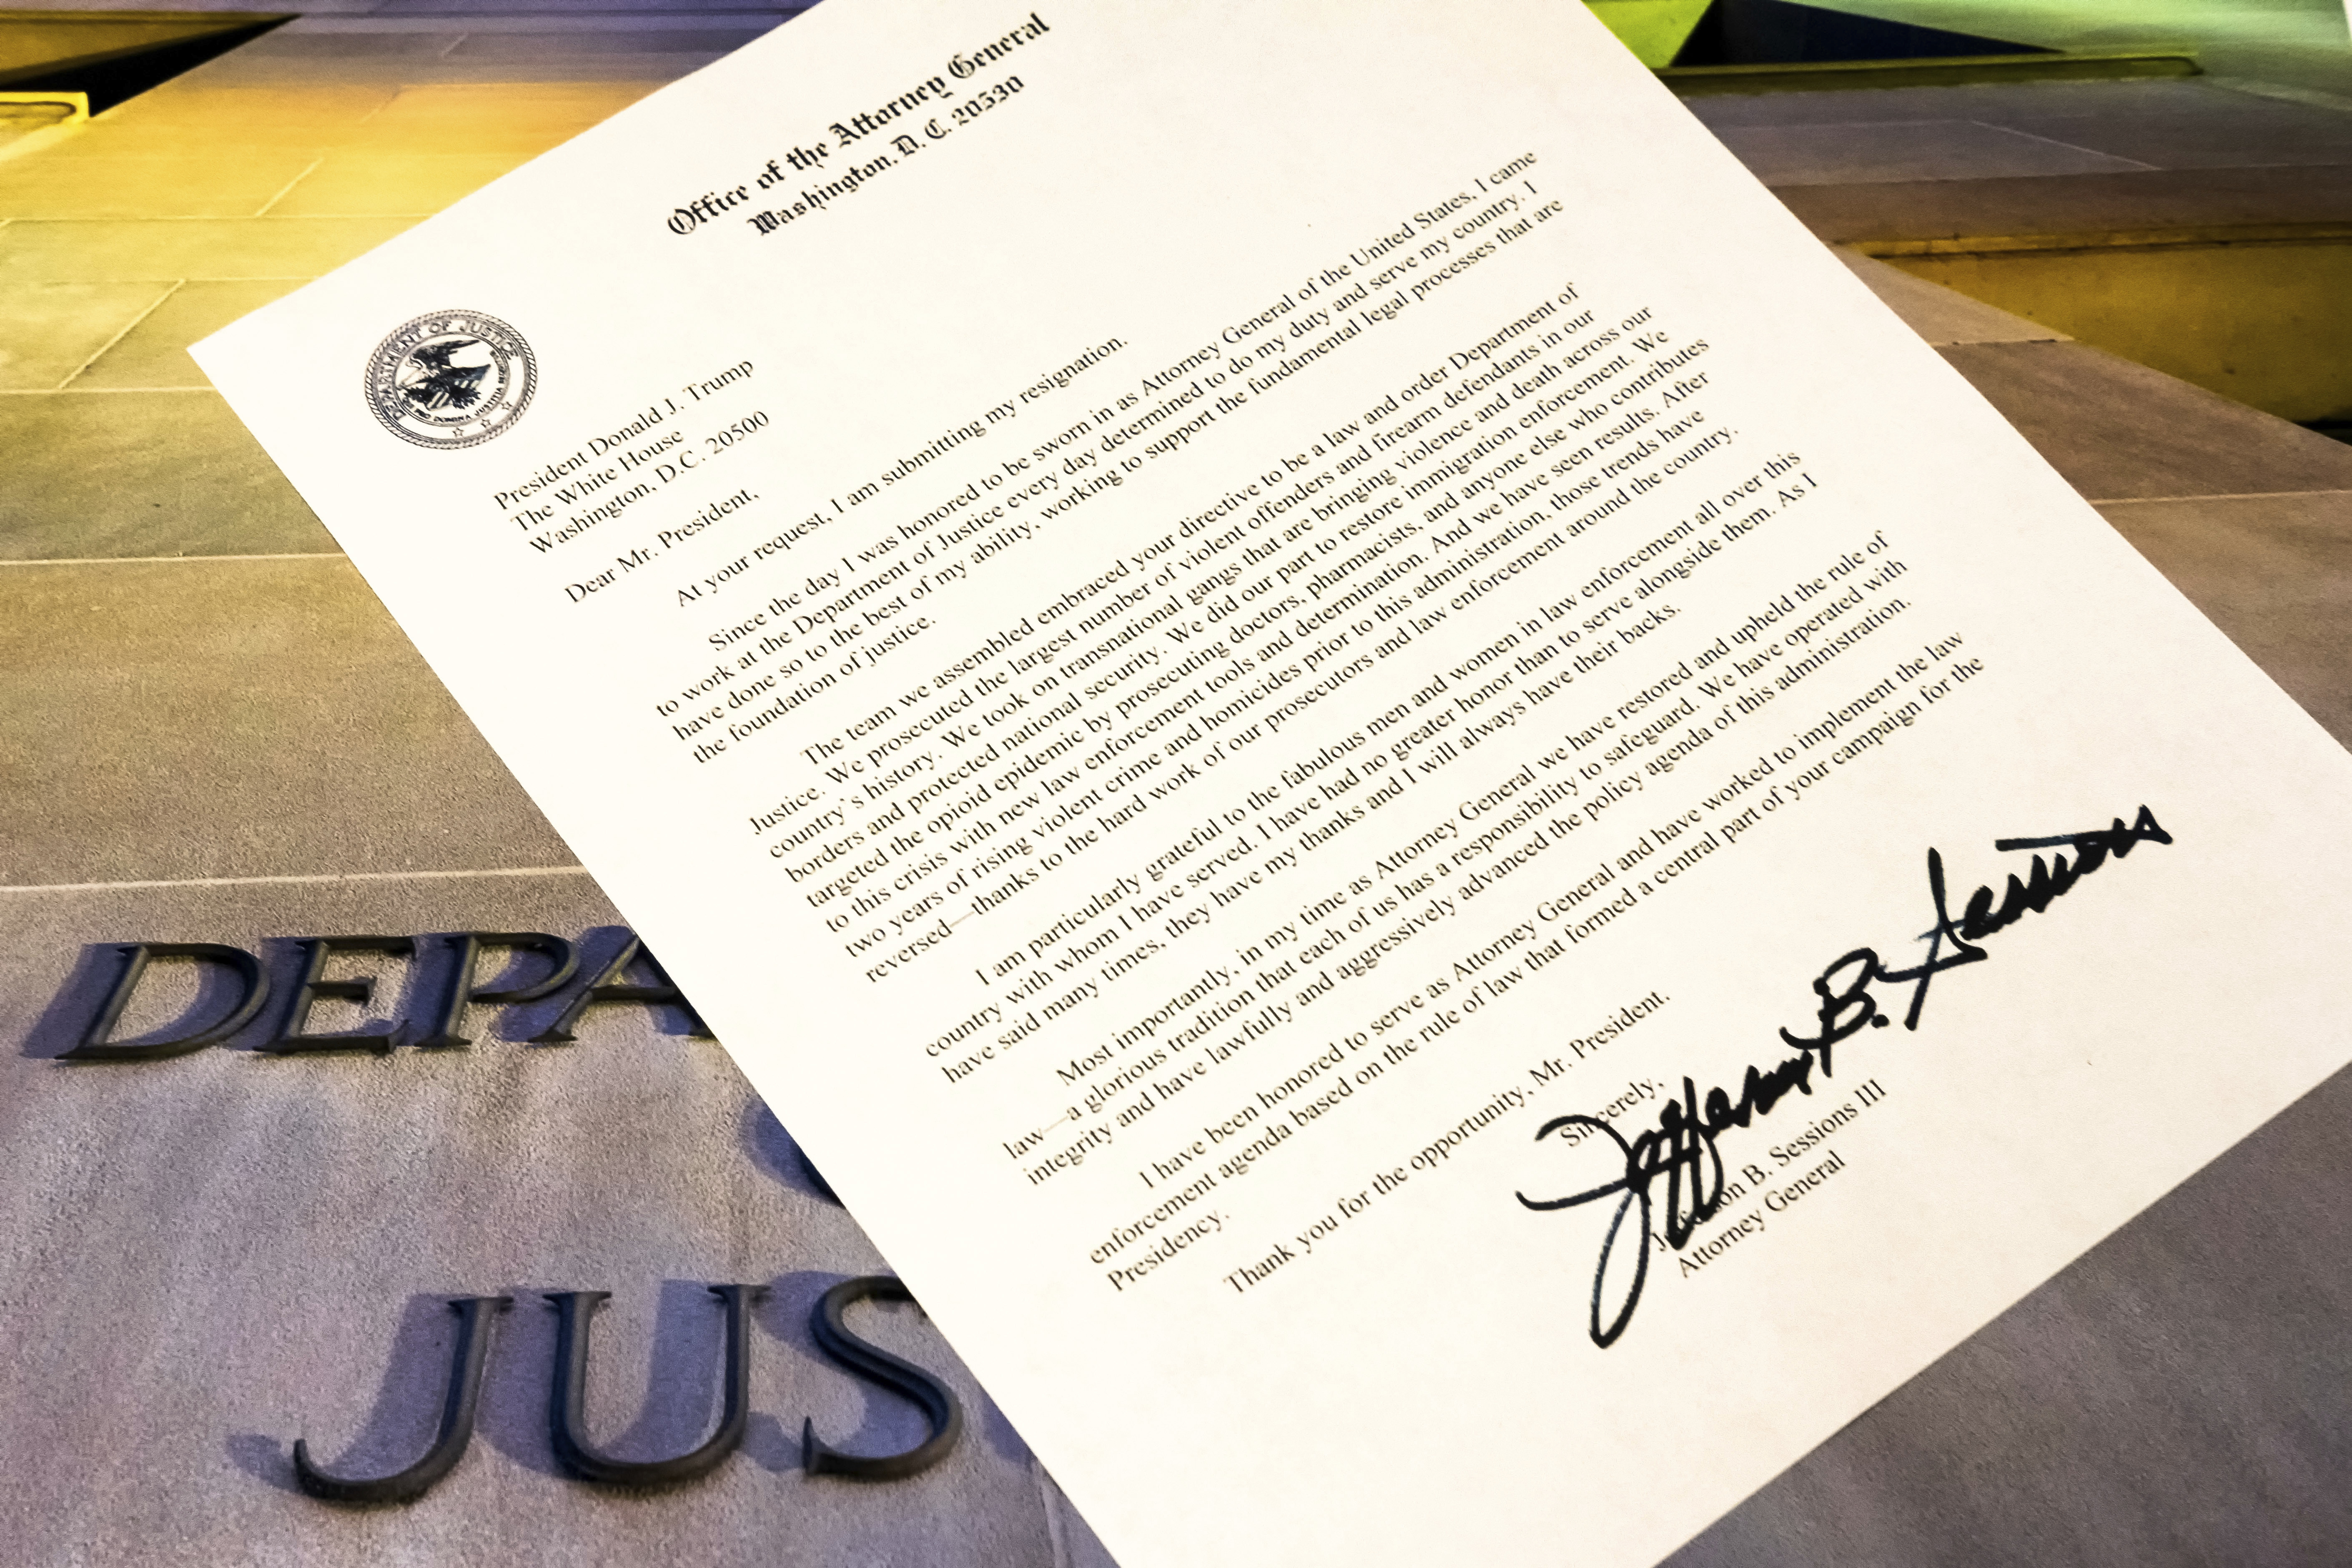 A copy of Jeff Sessions's resignation letter is photographed in Washington on an image of the exterior of the Justice Department 